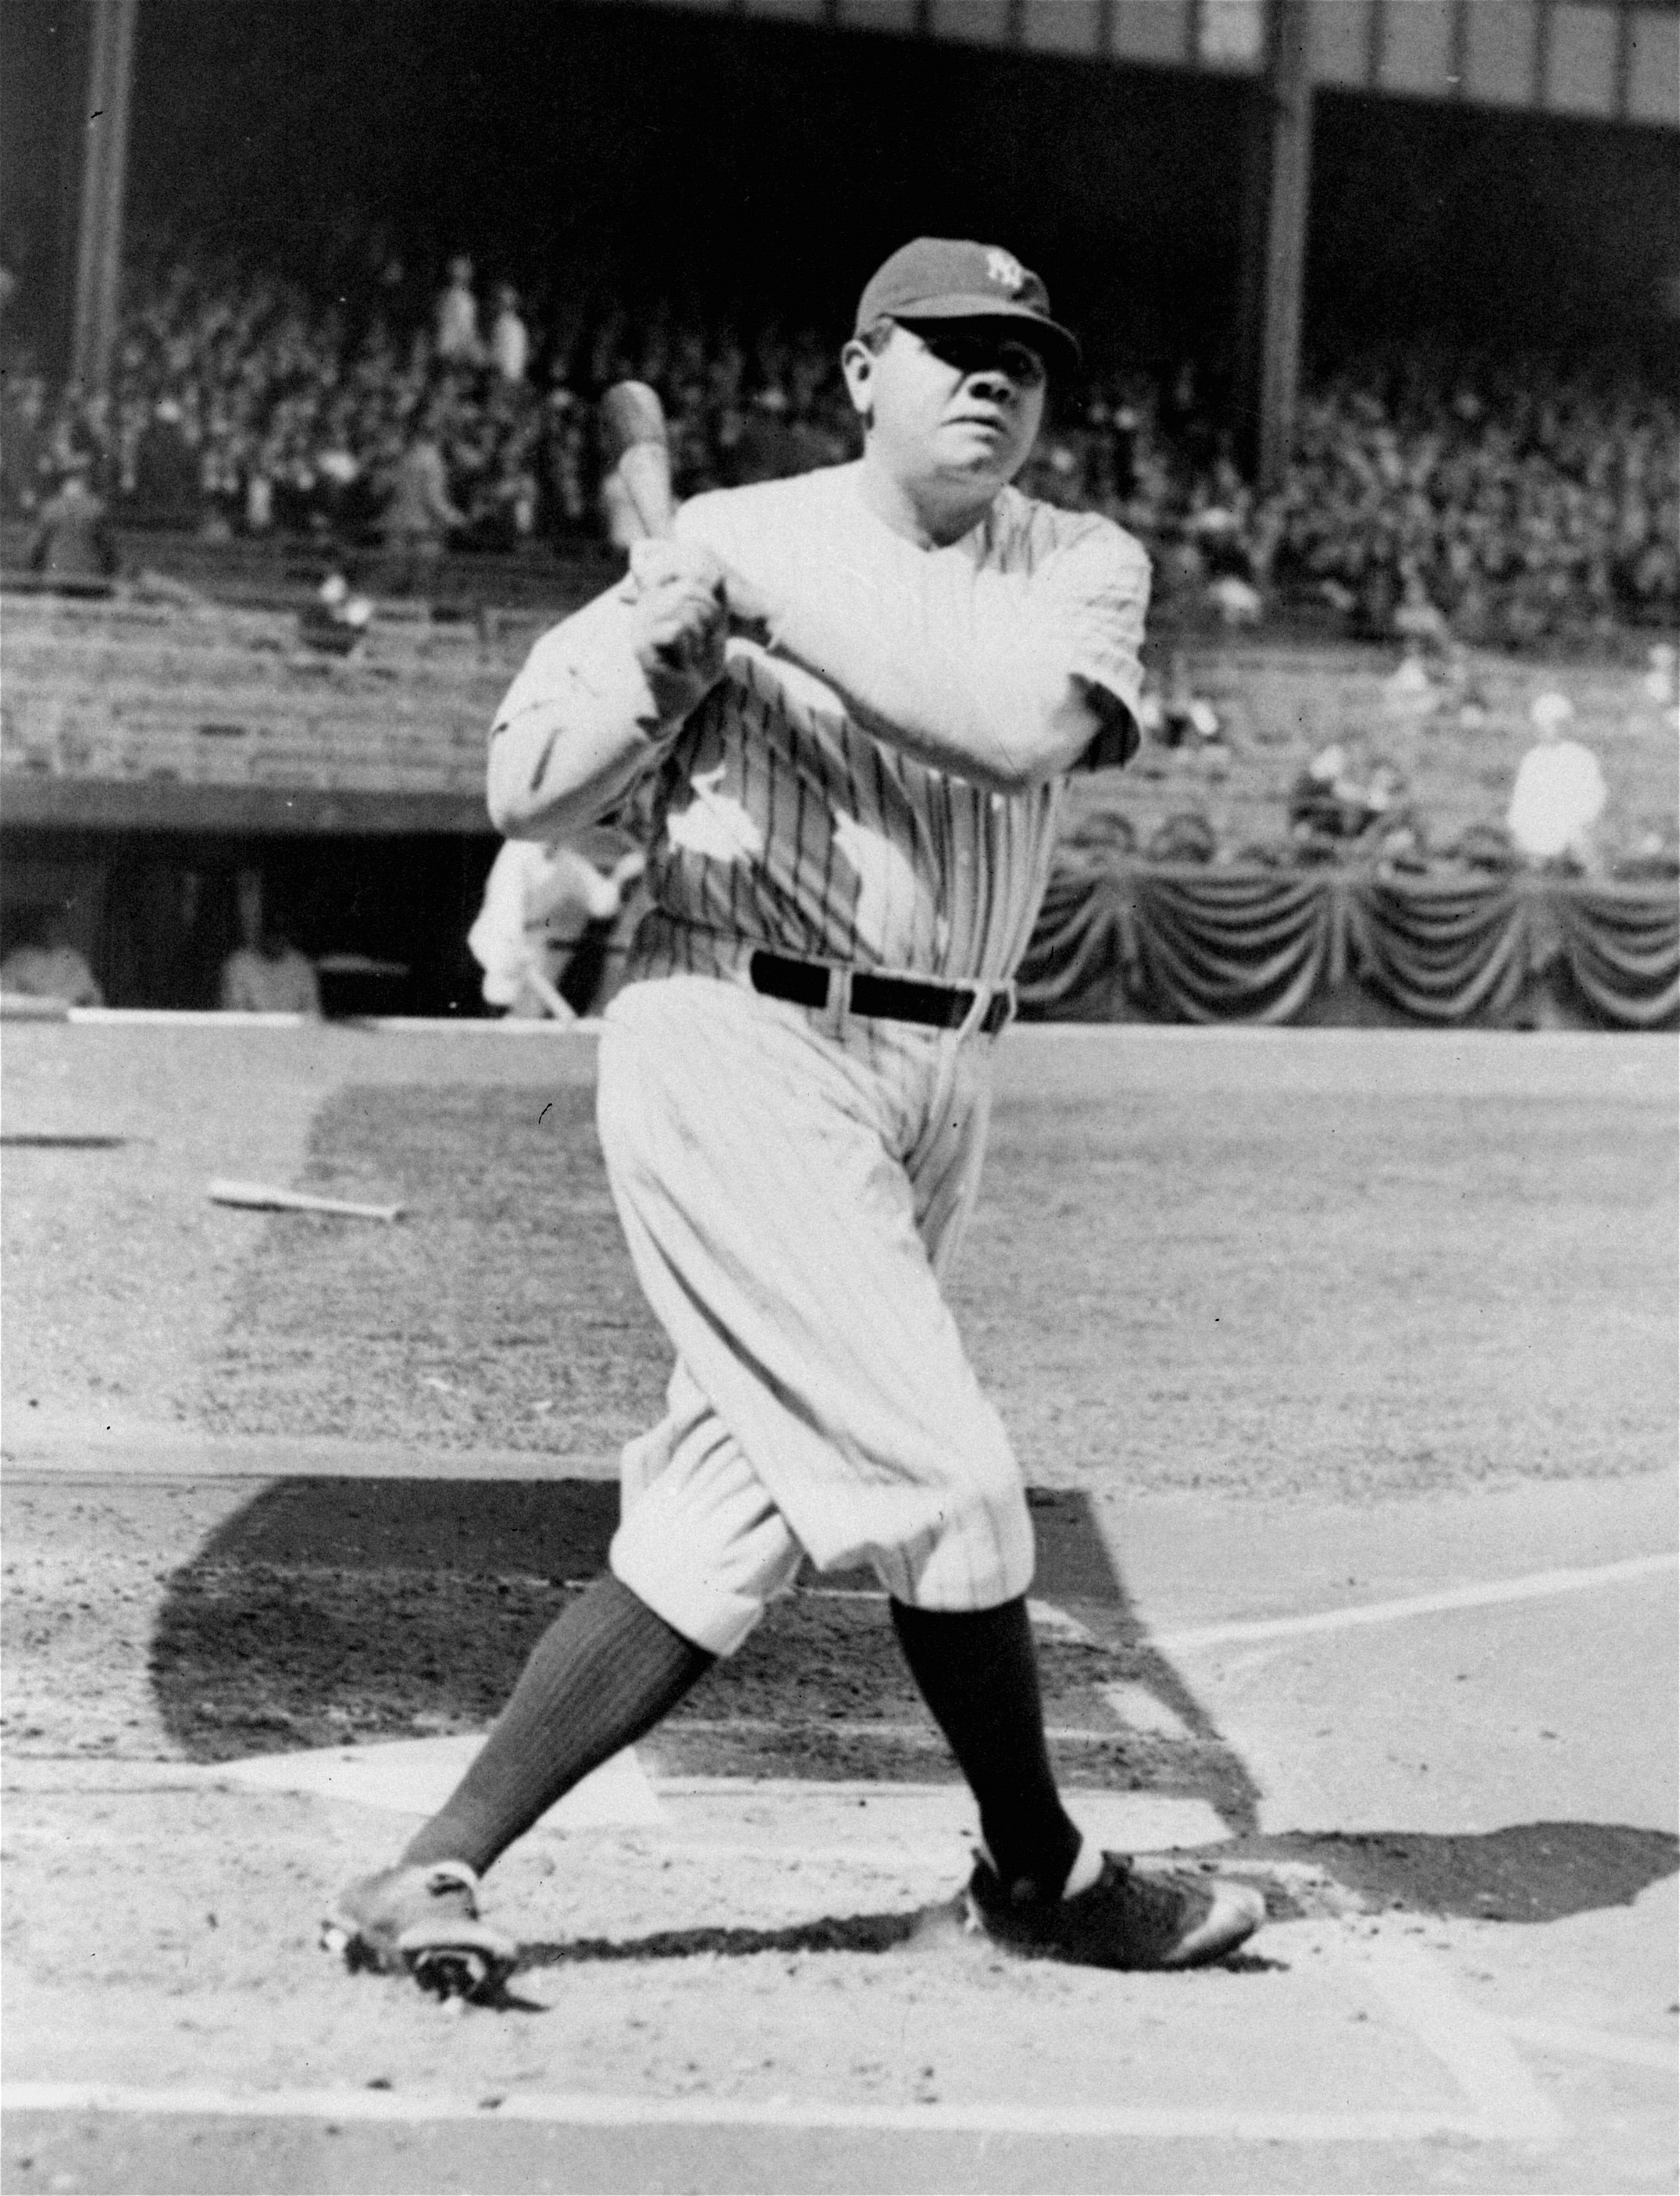 Babe Ruth's National League 'Career': 28 Games with the 1935